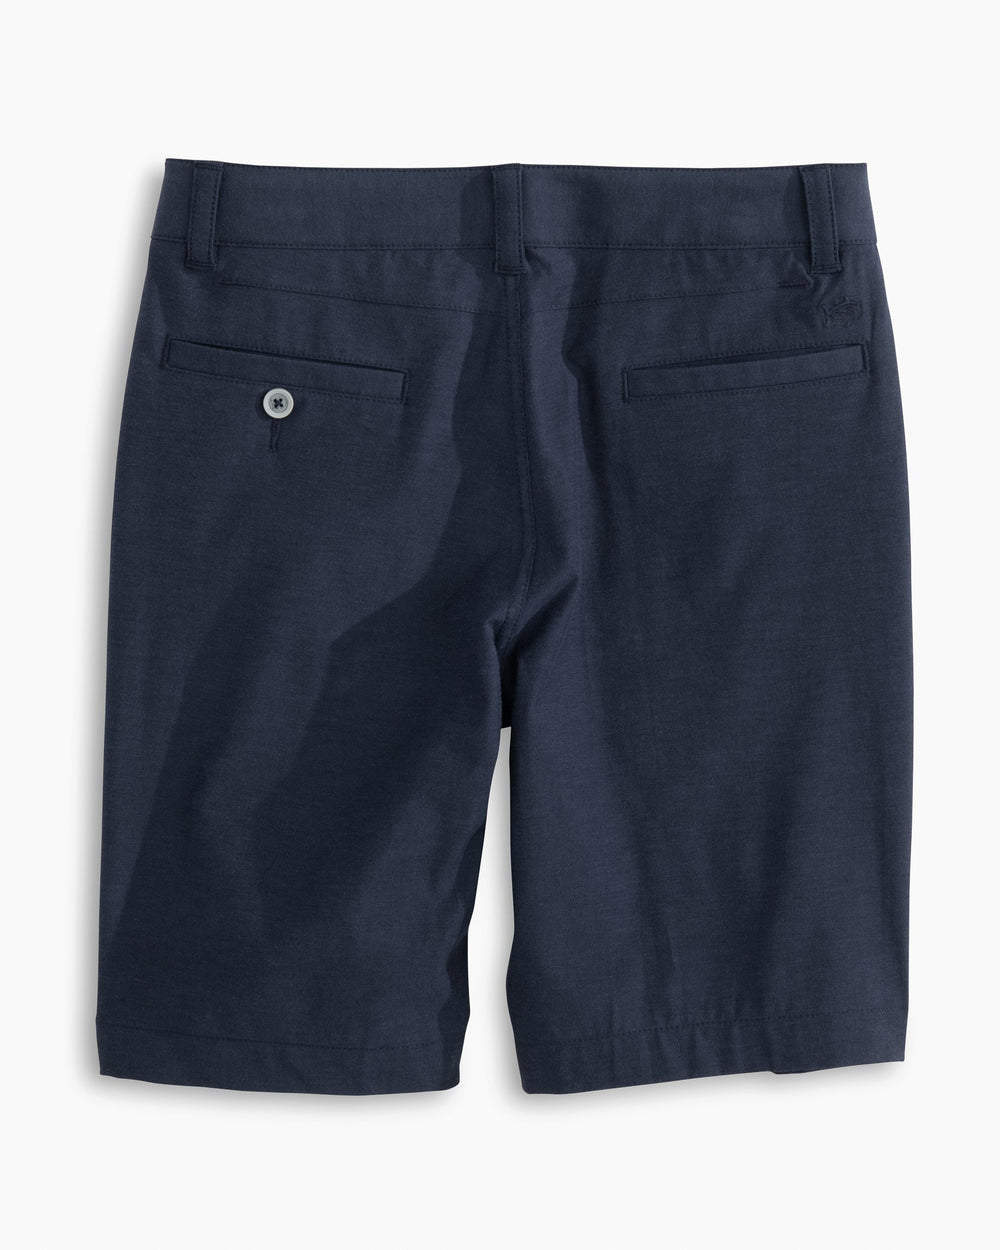 The back view of the Kid's Navy T3 Gulf Short by Southern Tide - True Navy